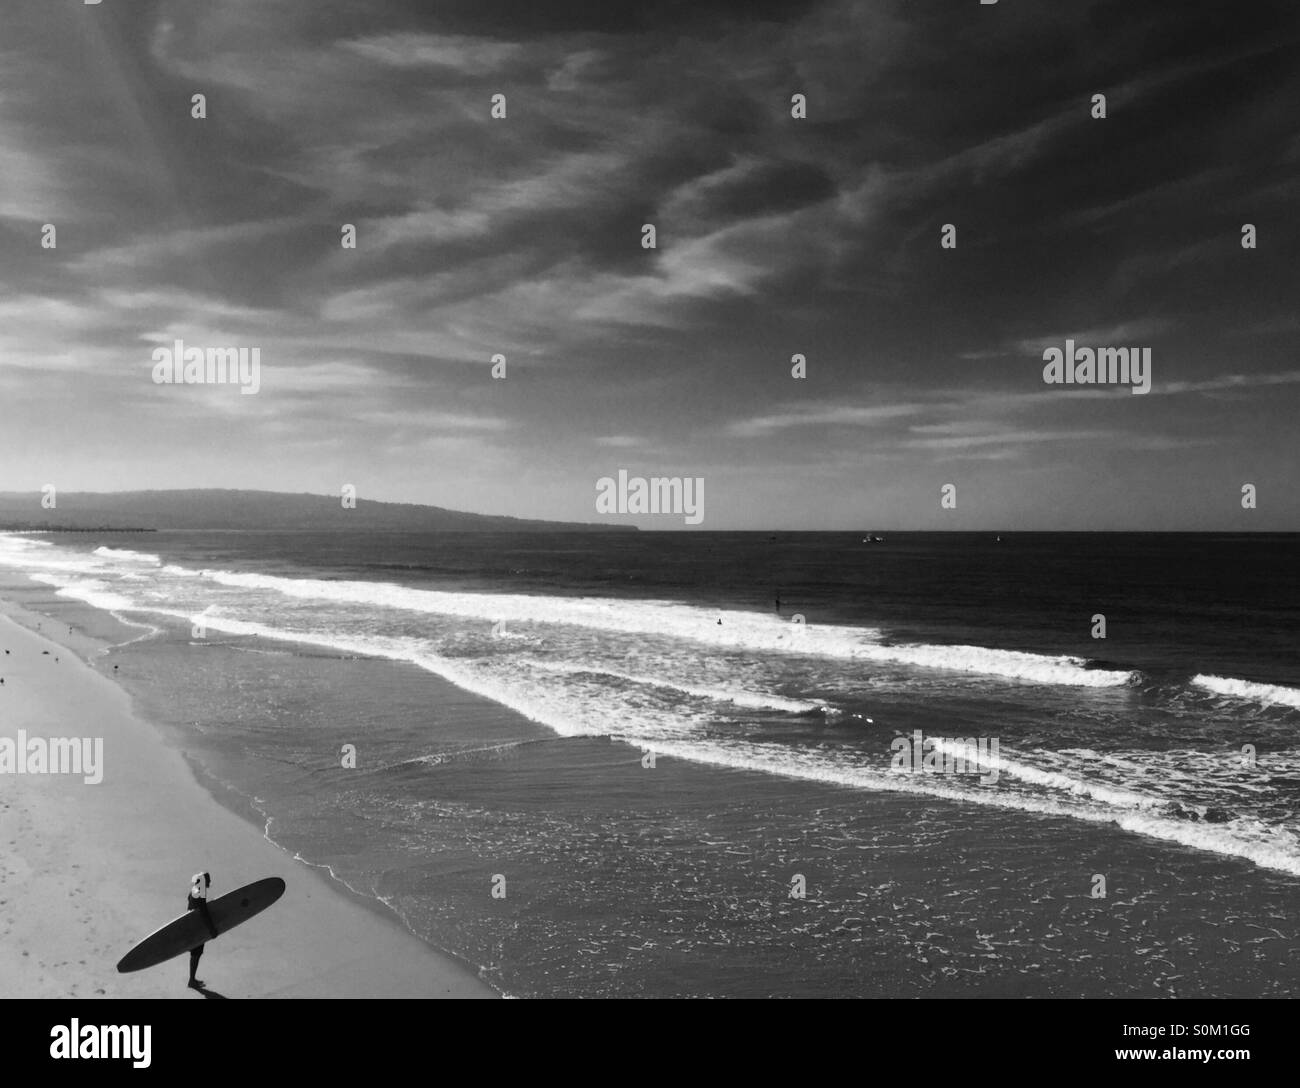 Surfer stands on the beach looking at the surf. Manhattan Beach l, California USA. Stock Photo